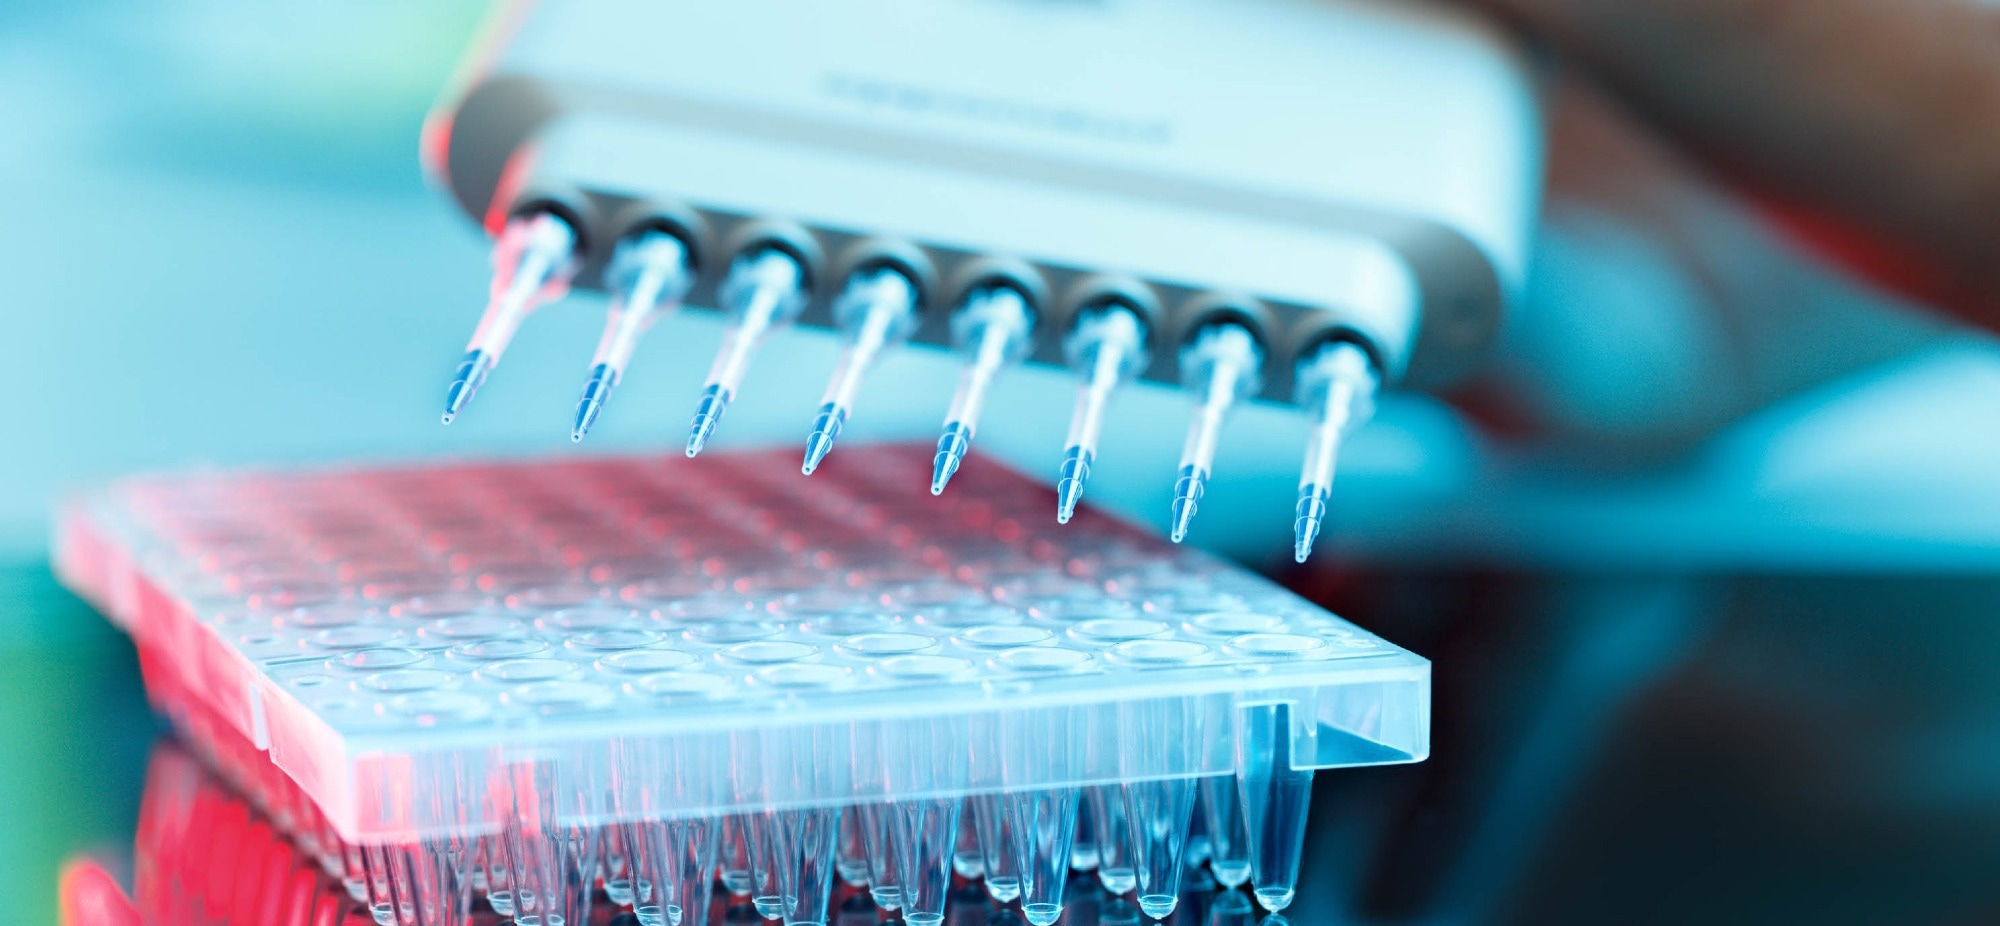 Study: Precision Medicine in a Community Cancer Center: Pan-Cancer DNA/RNA Sequencing of Tumors Reveals Clinically Relevant Gene Fusions. Image Credit: luchschenF/Shutterstock.com